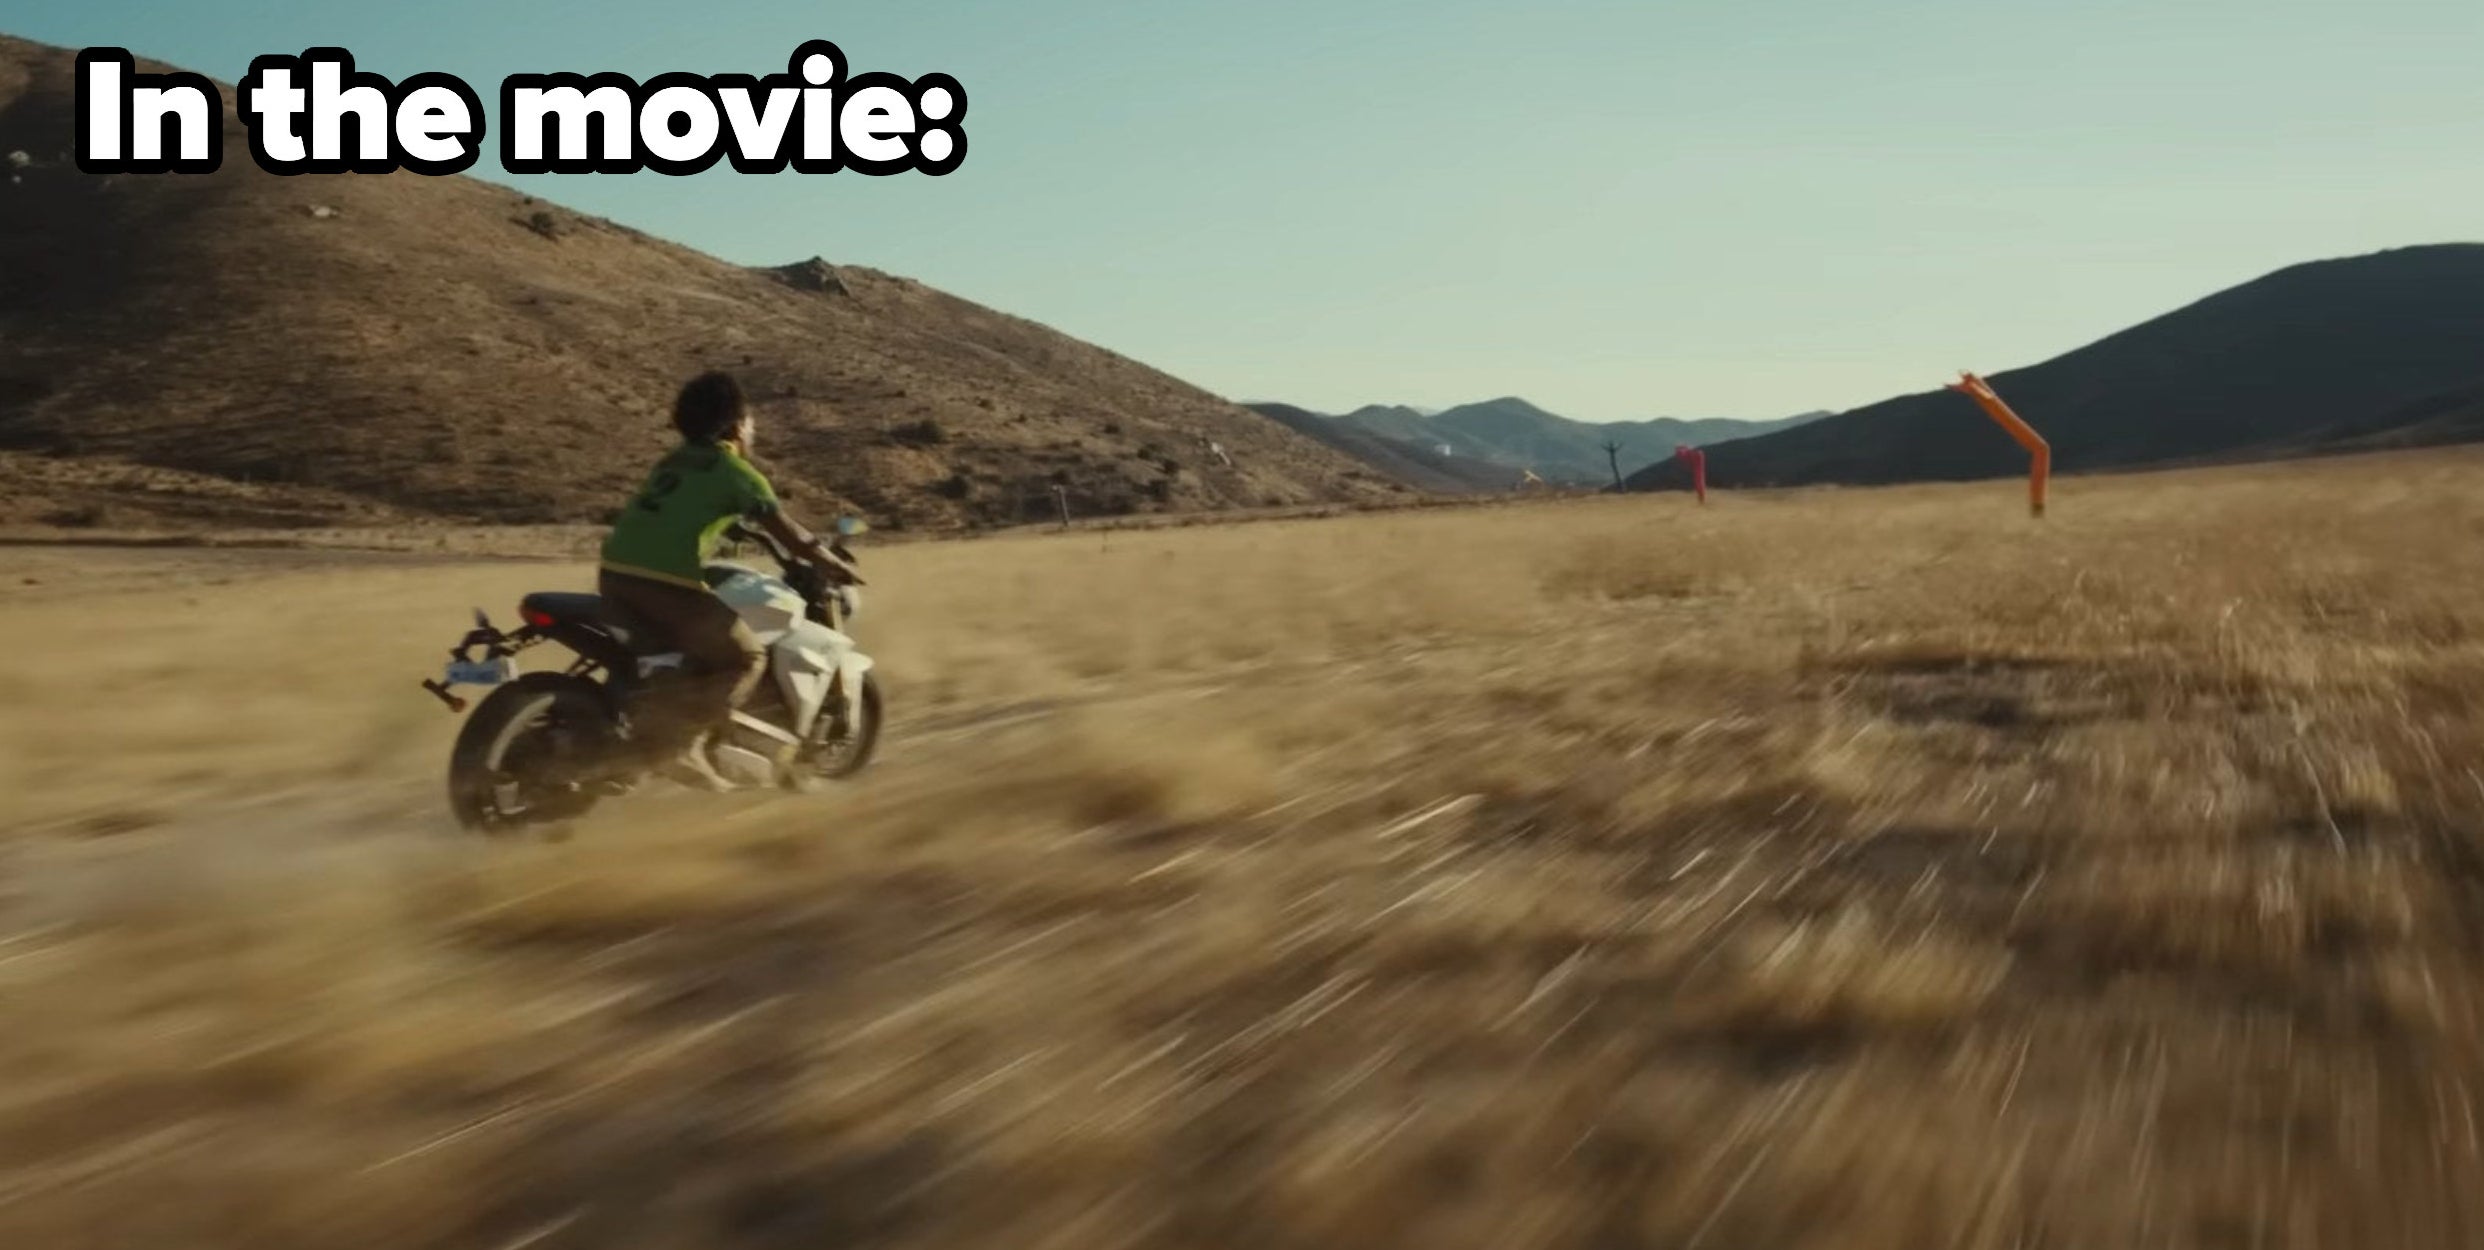 A character riding through fields on a motorcycle